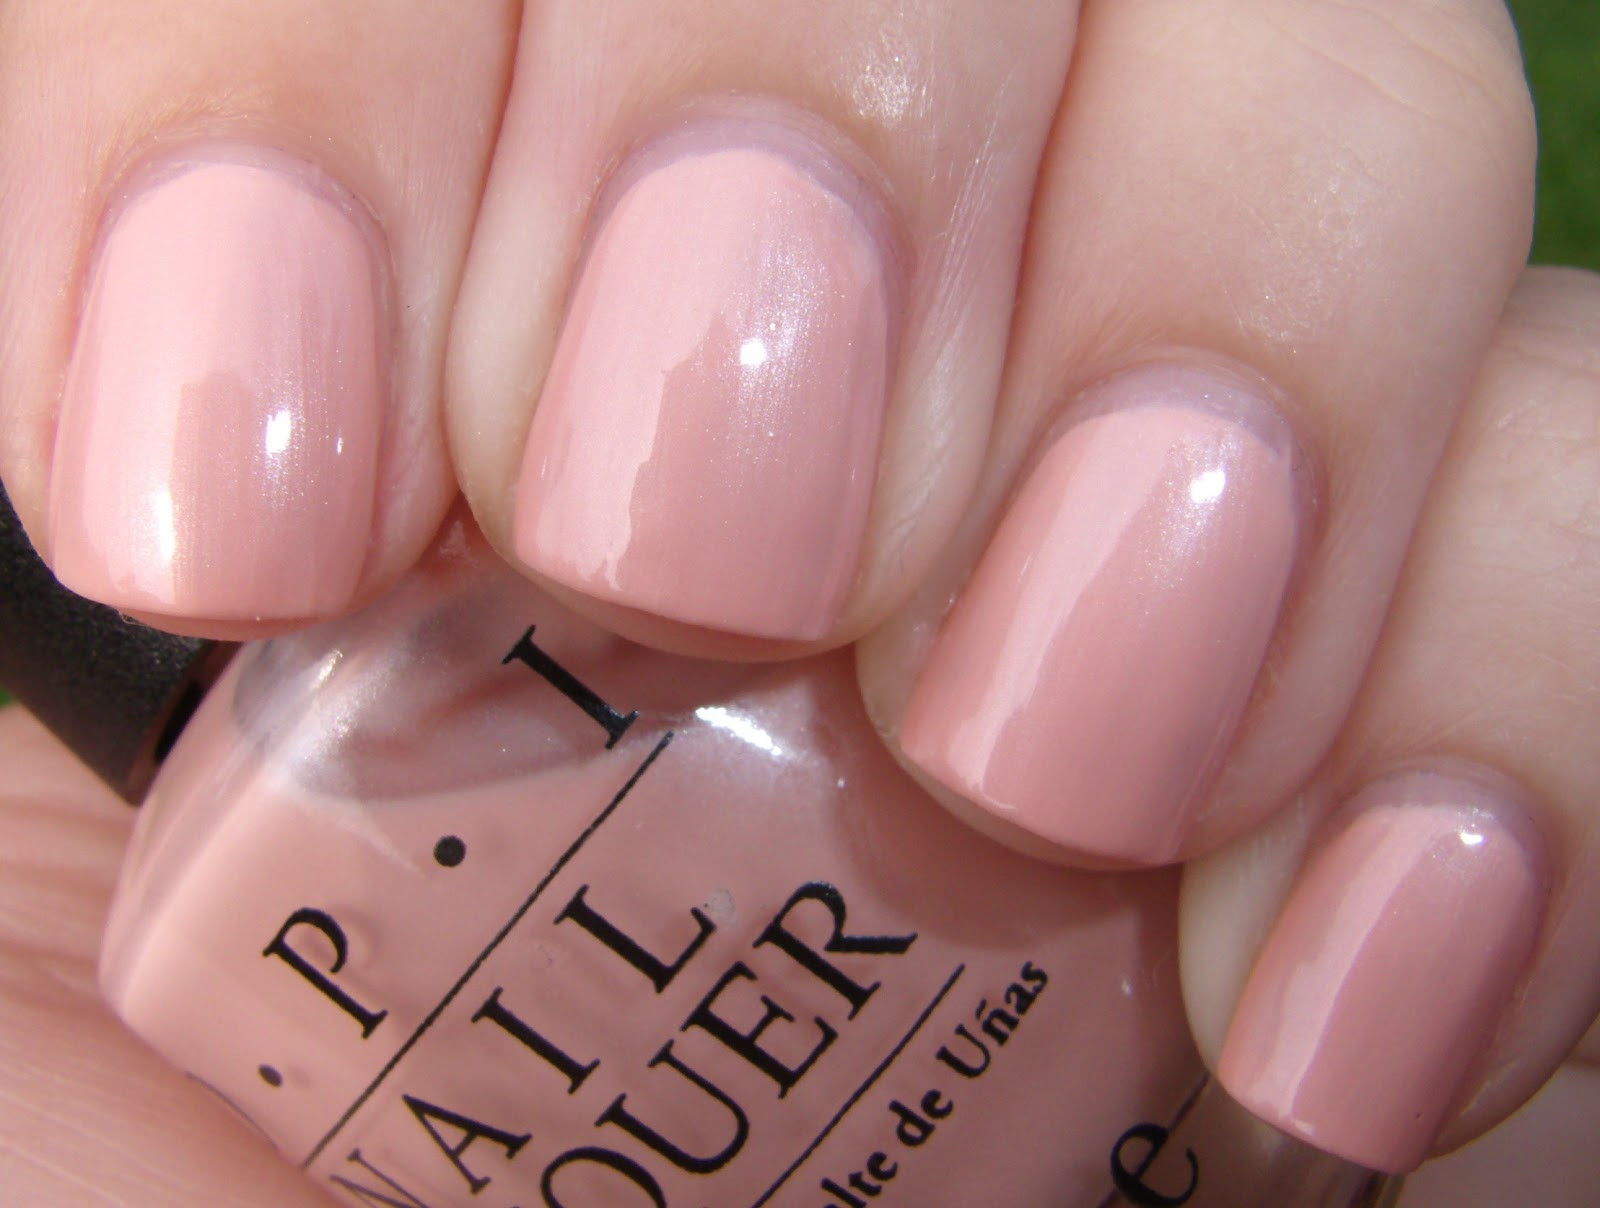 OPI's Most Popular Toe Nail Colors - wide 7